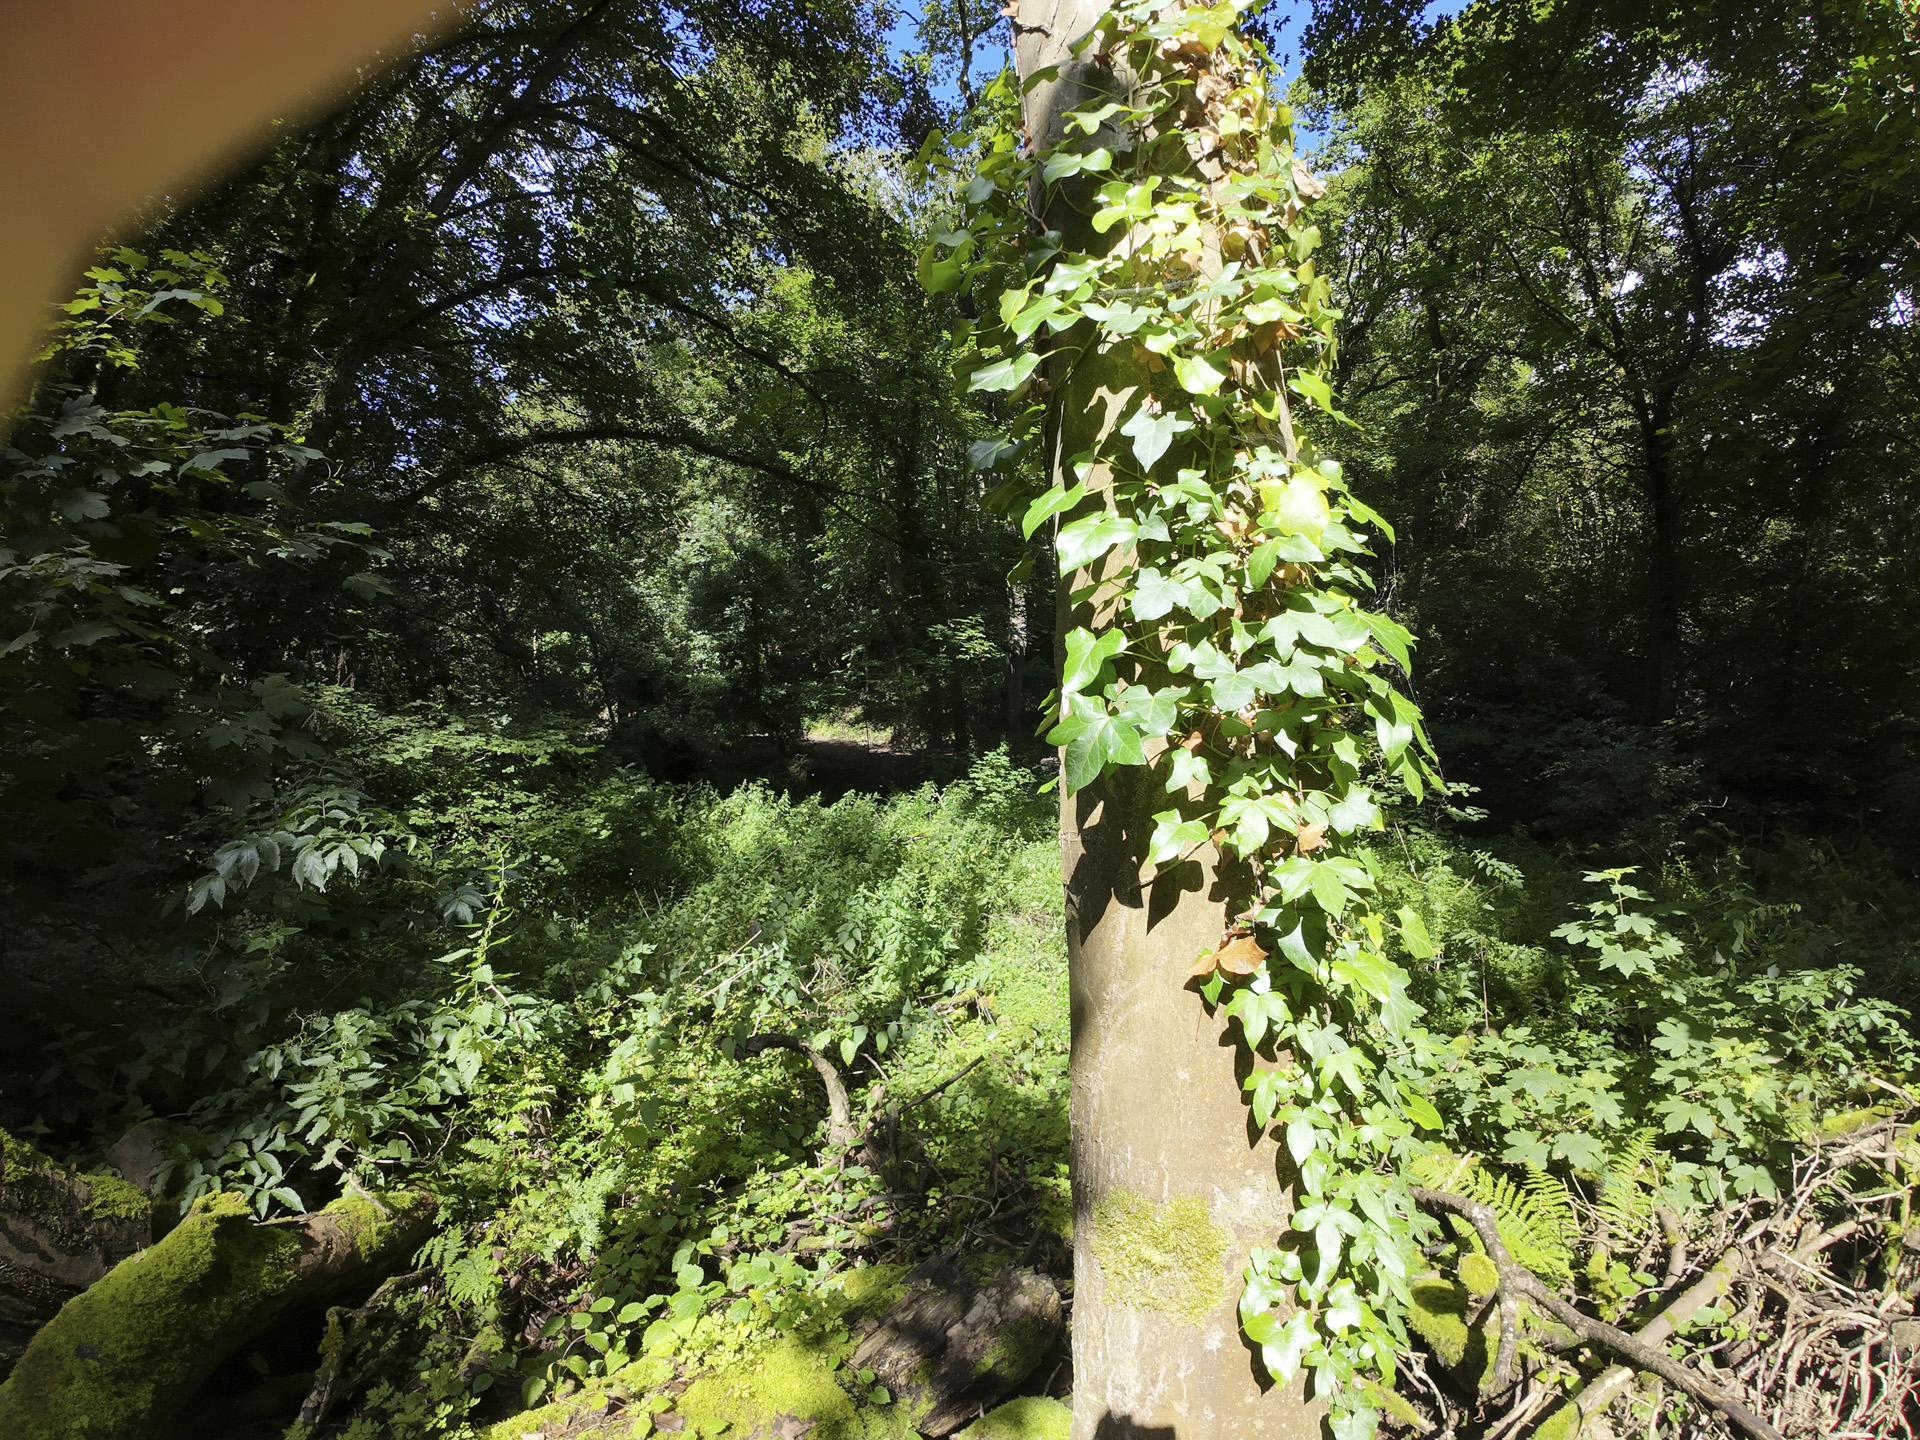 UK Woodland details of ivy climbing a tree in the sun and shade